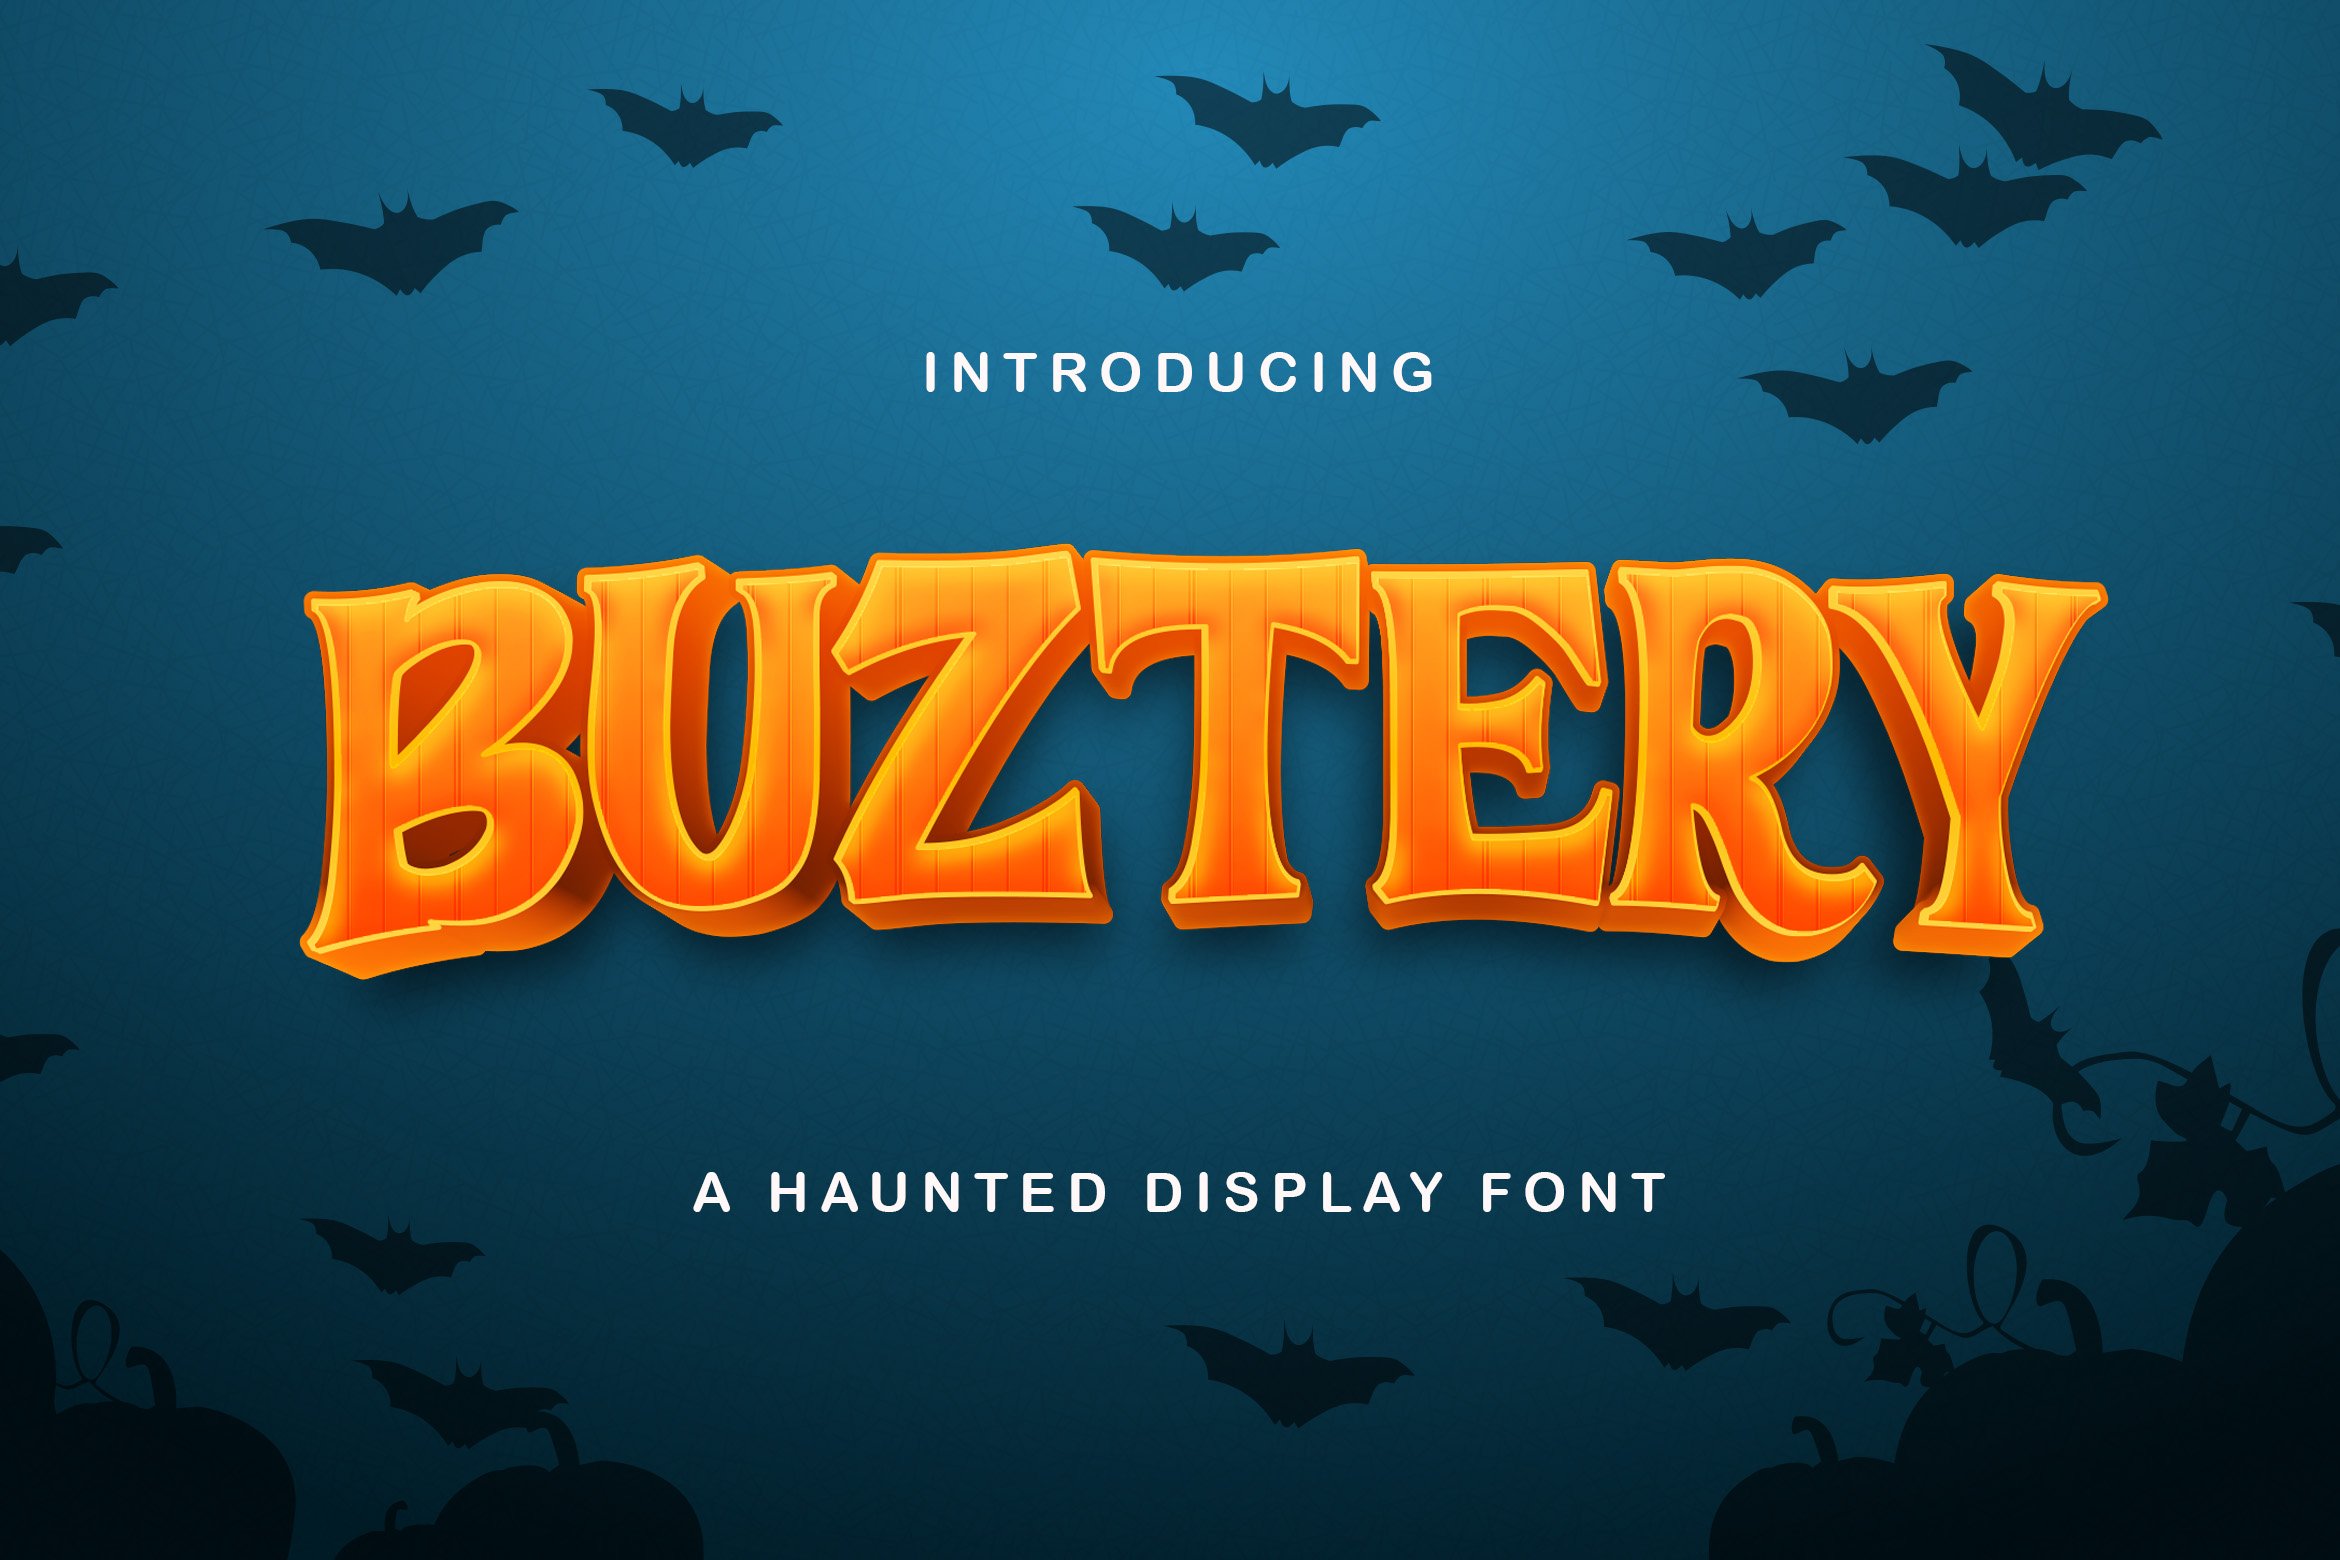 BUSTERY - Haunted Display Font cover image.